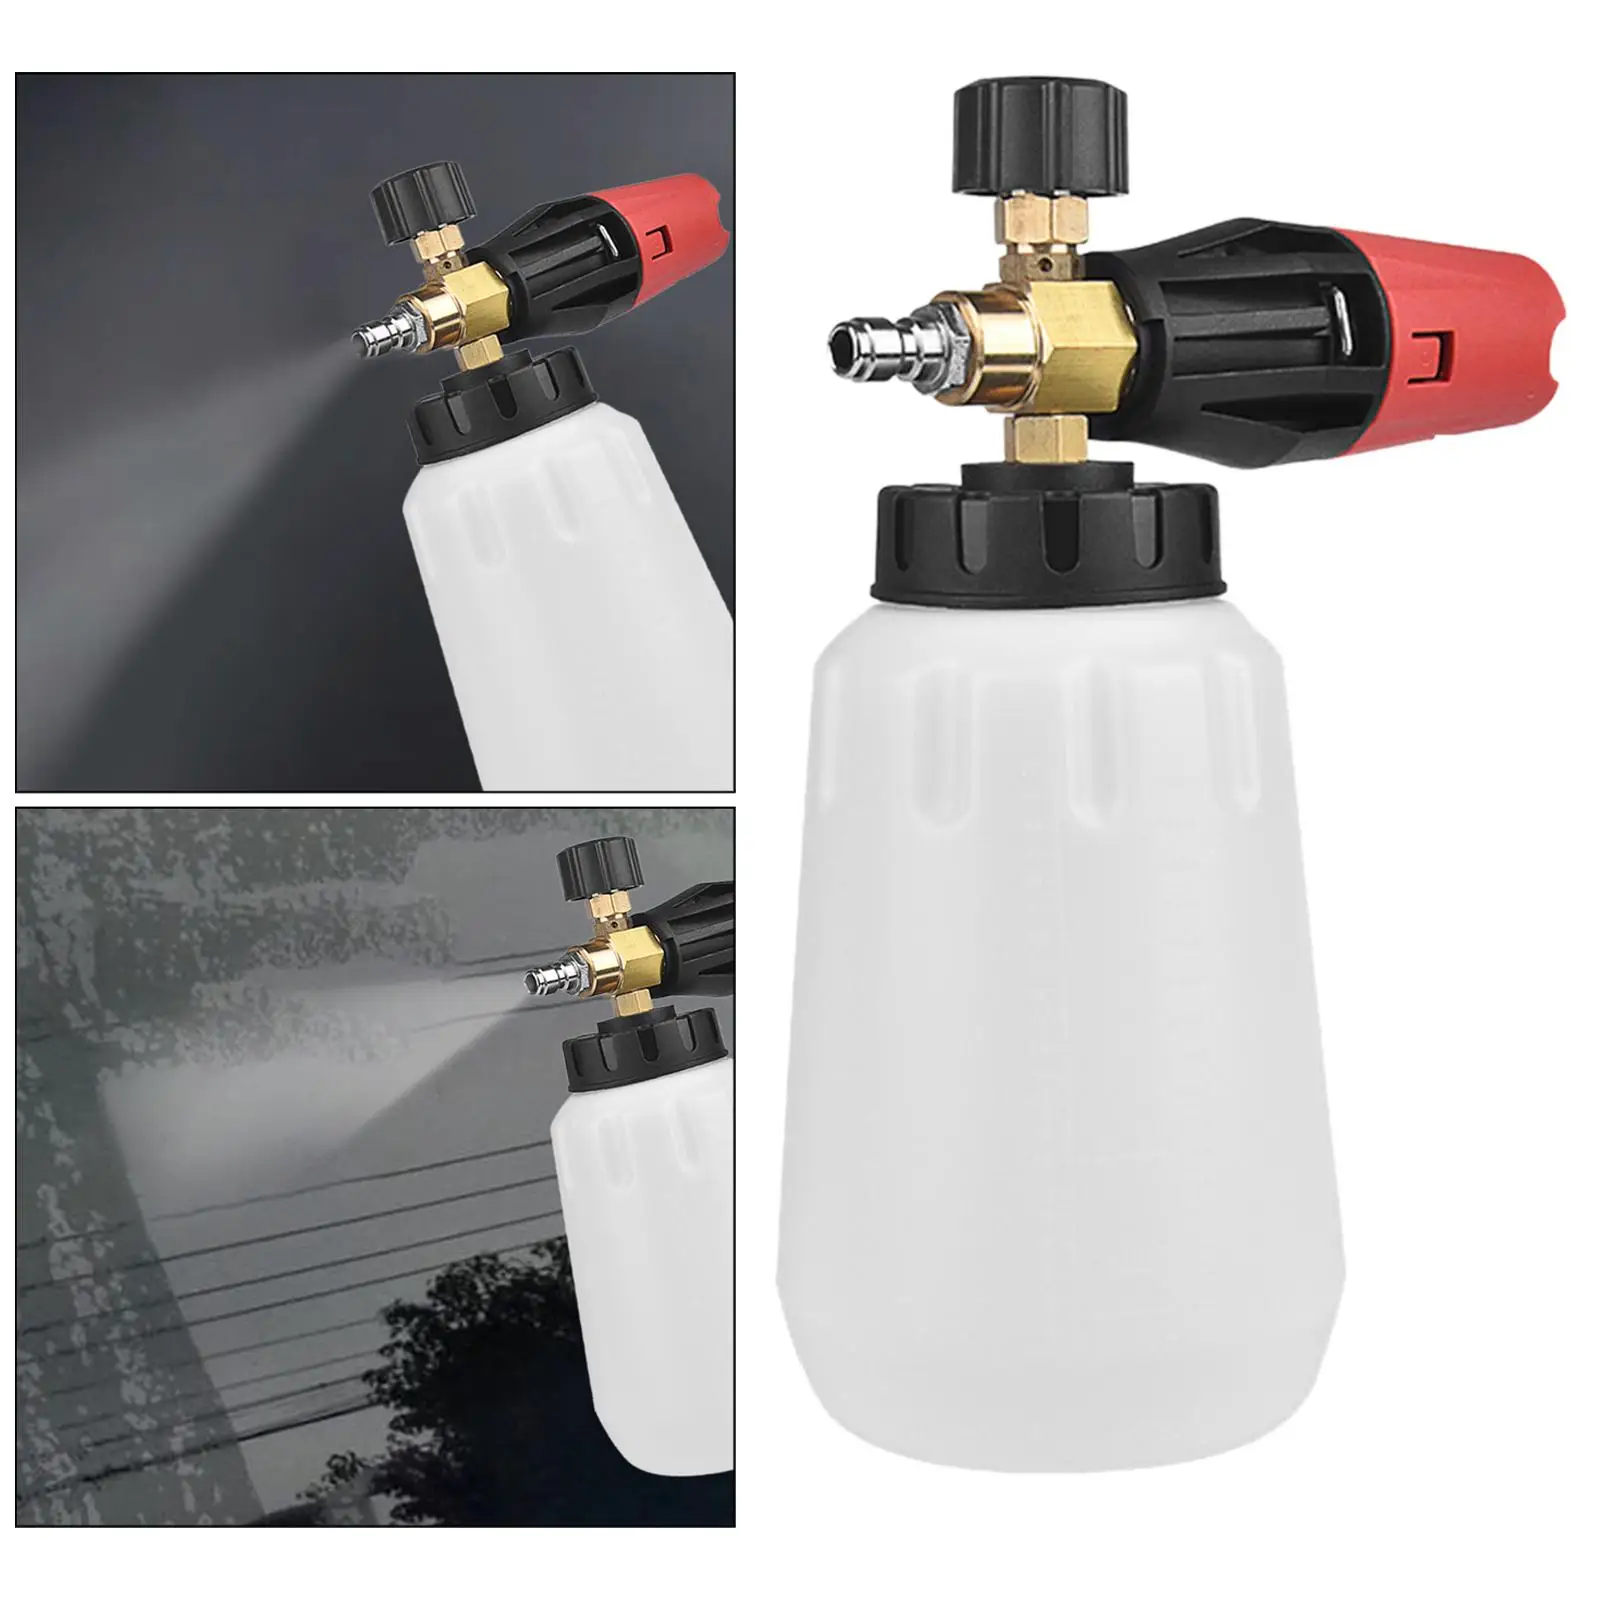 Professional Foam Sprayer Cleaning Tools Car Washer Bottle for Automotive